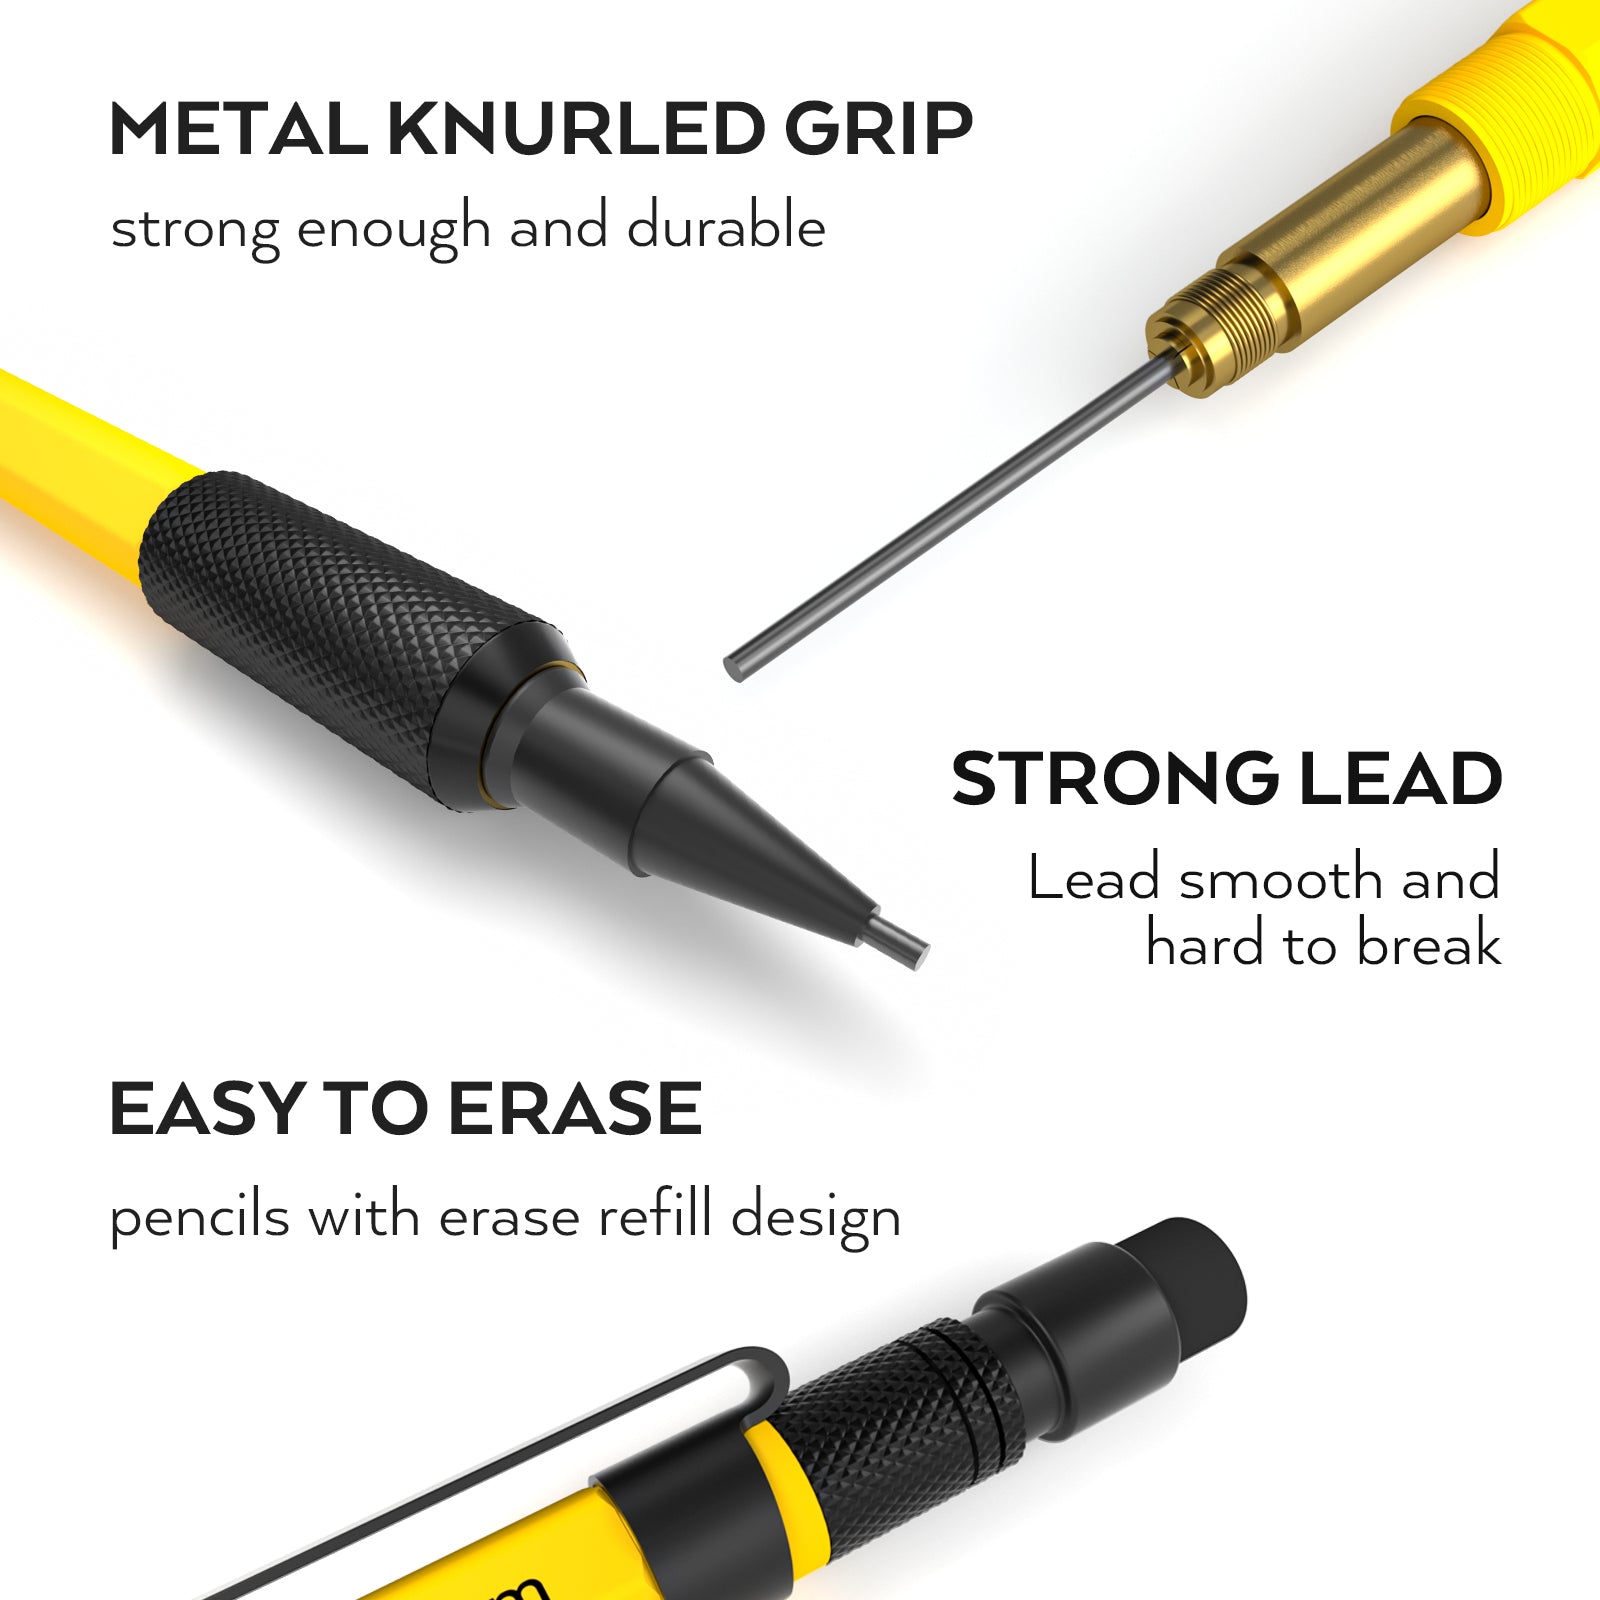 Knurled drafting pencils - Collection Photos and Videos